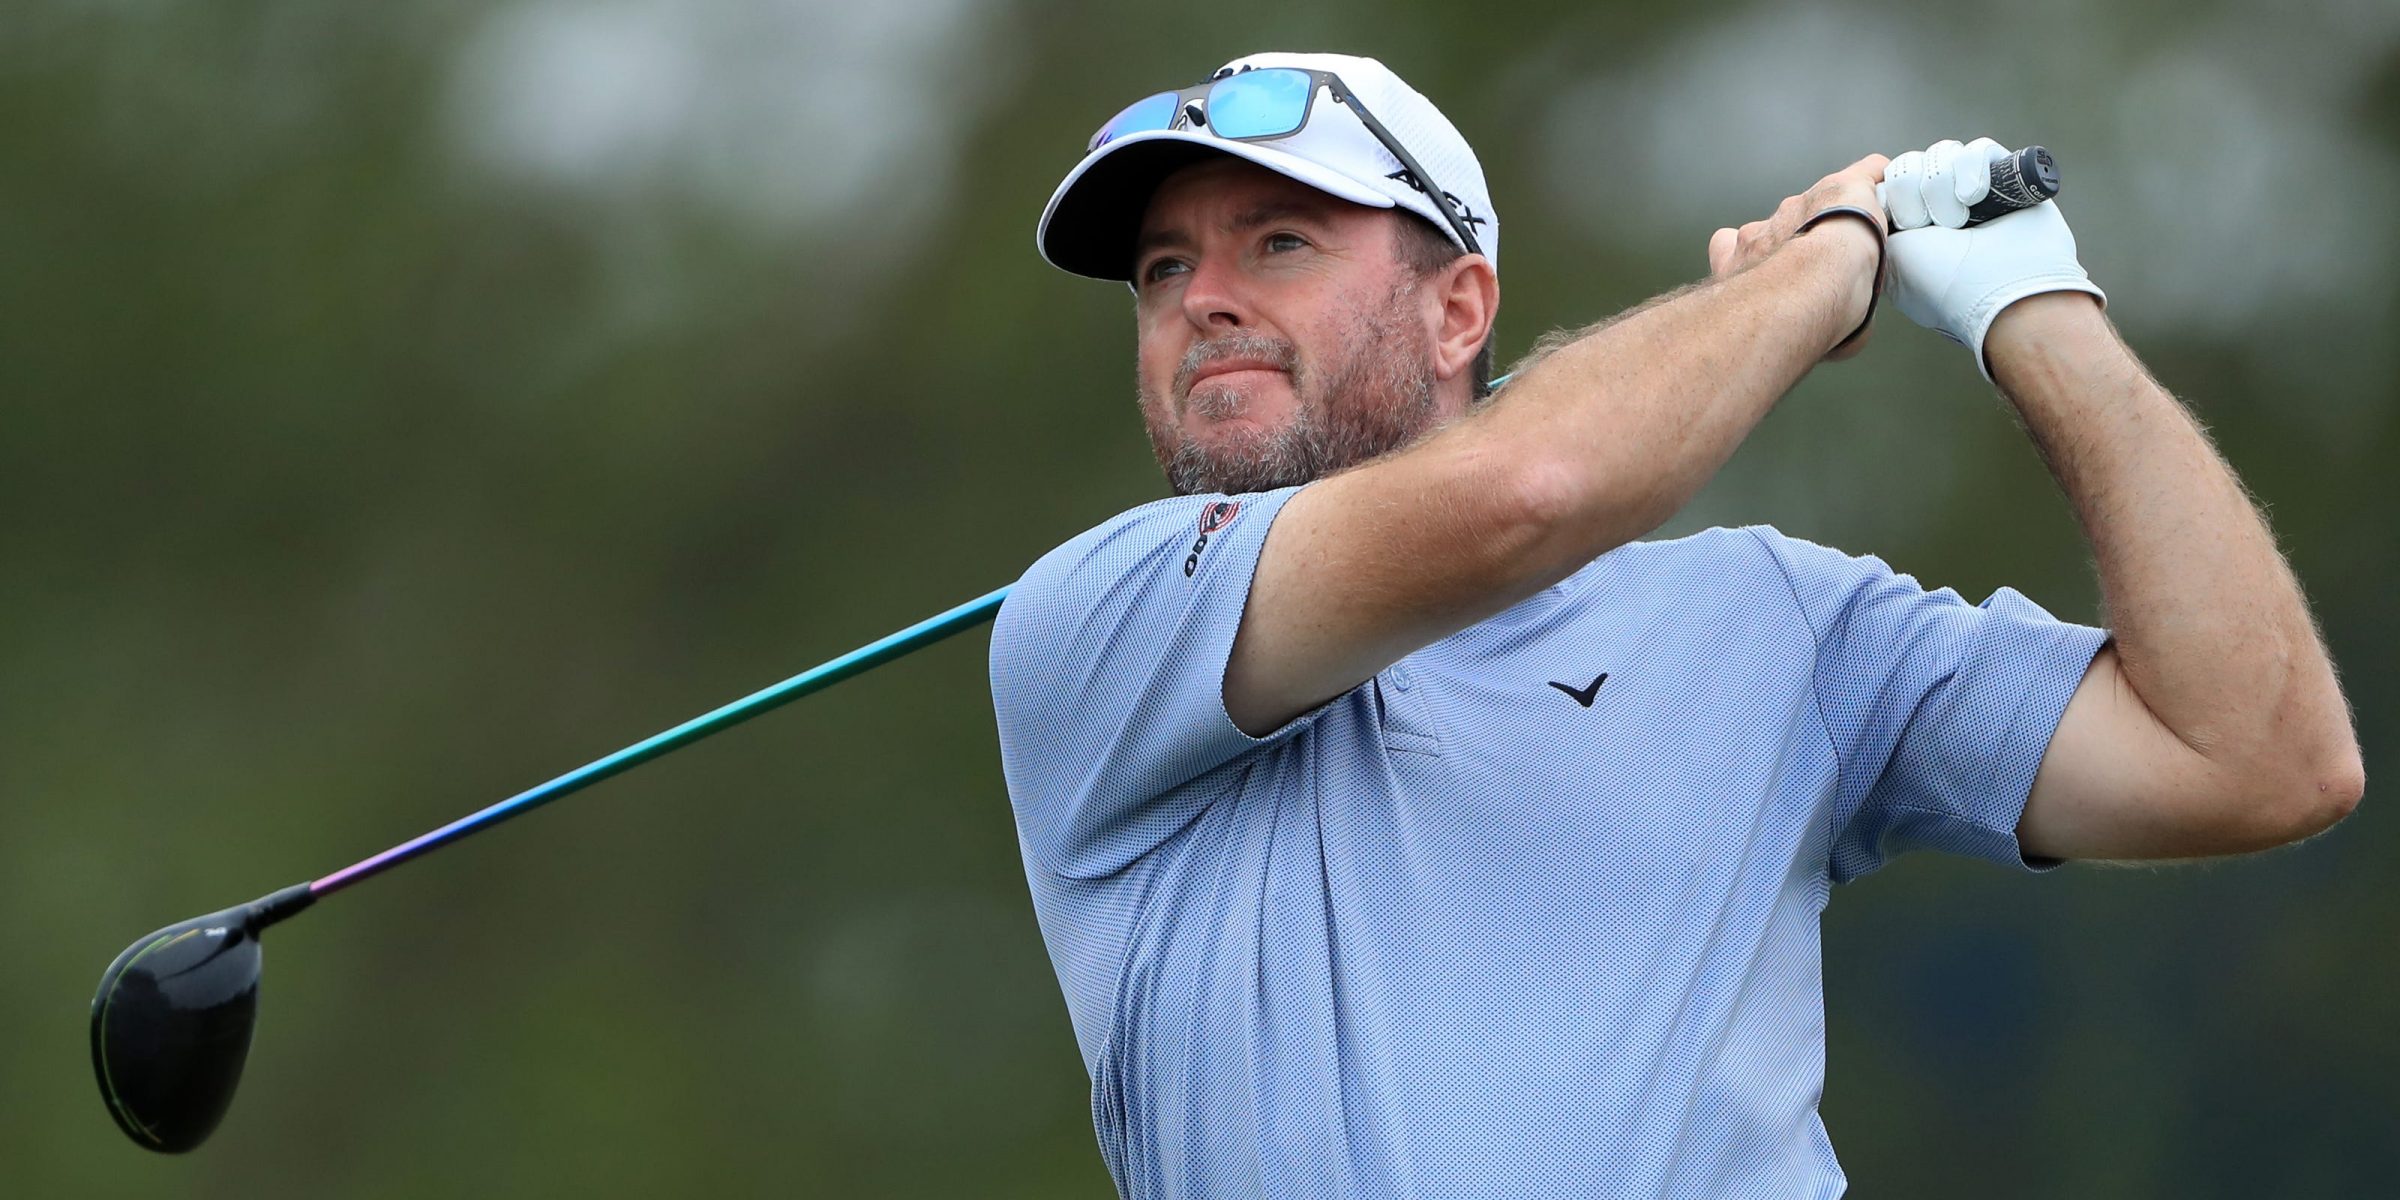 Robert Garrigus opens up on his March THC suspension, calls PGA Tour policy 'ridiculous'